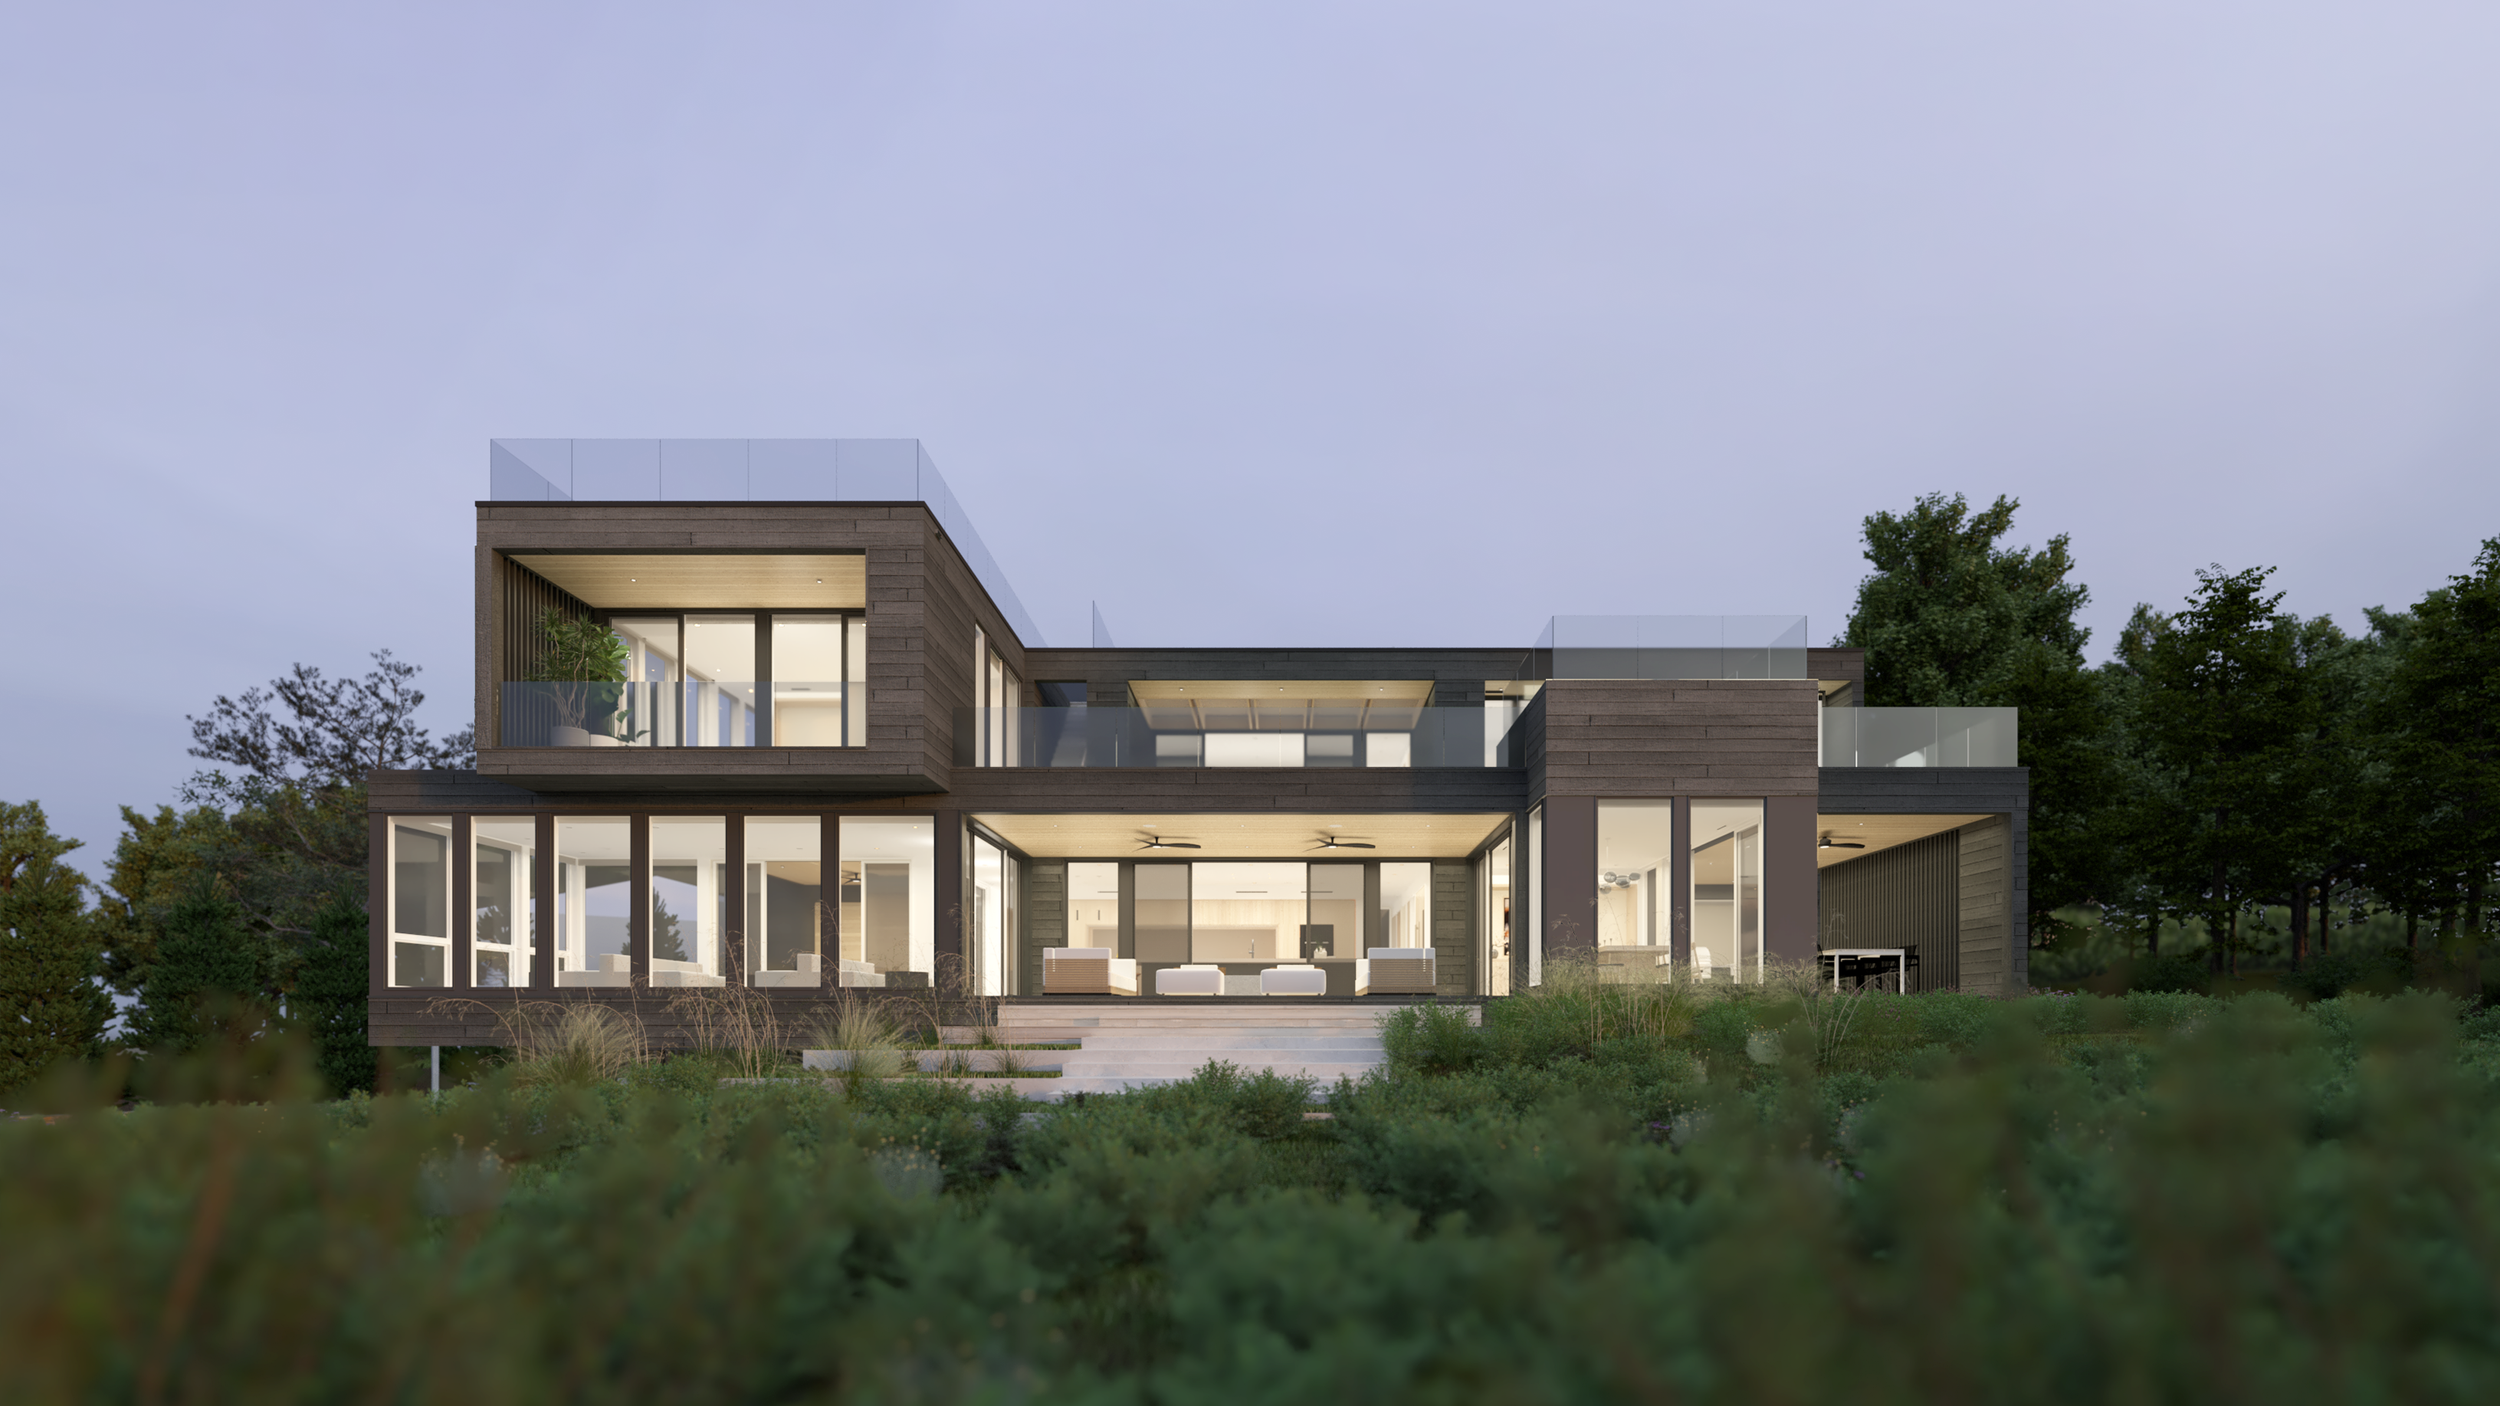 01-re4a-resolution-4-architecture-modern-modular-prefab-briarcliff-manor-residence-exterior.png